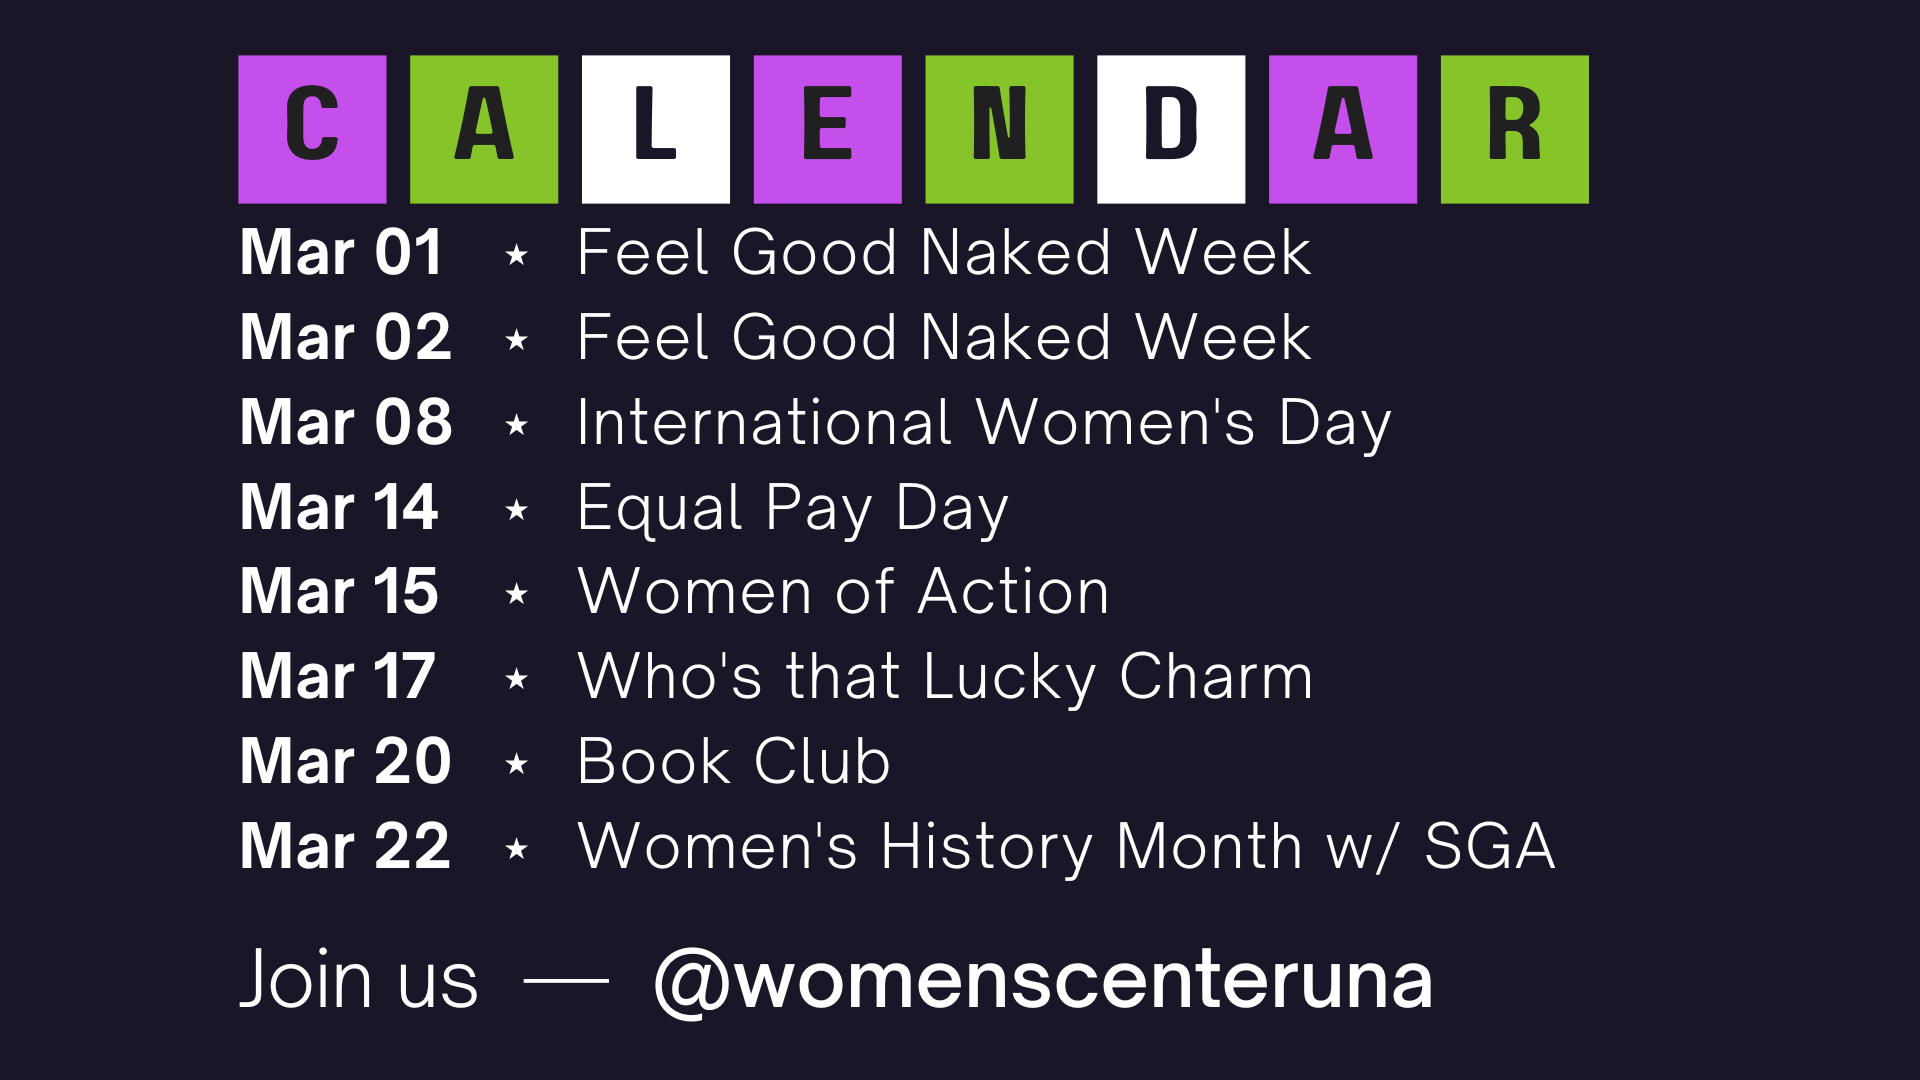 image of calendar of events